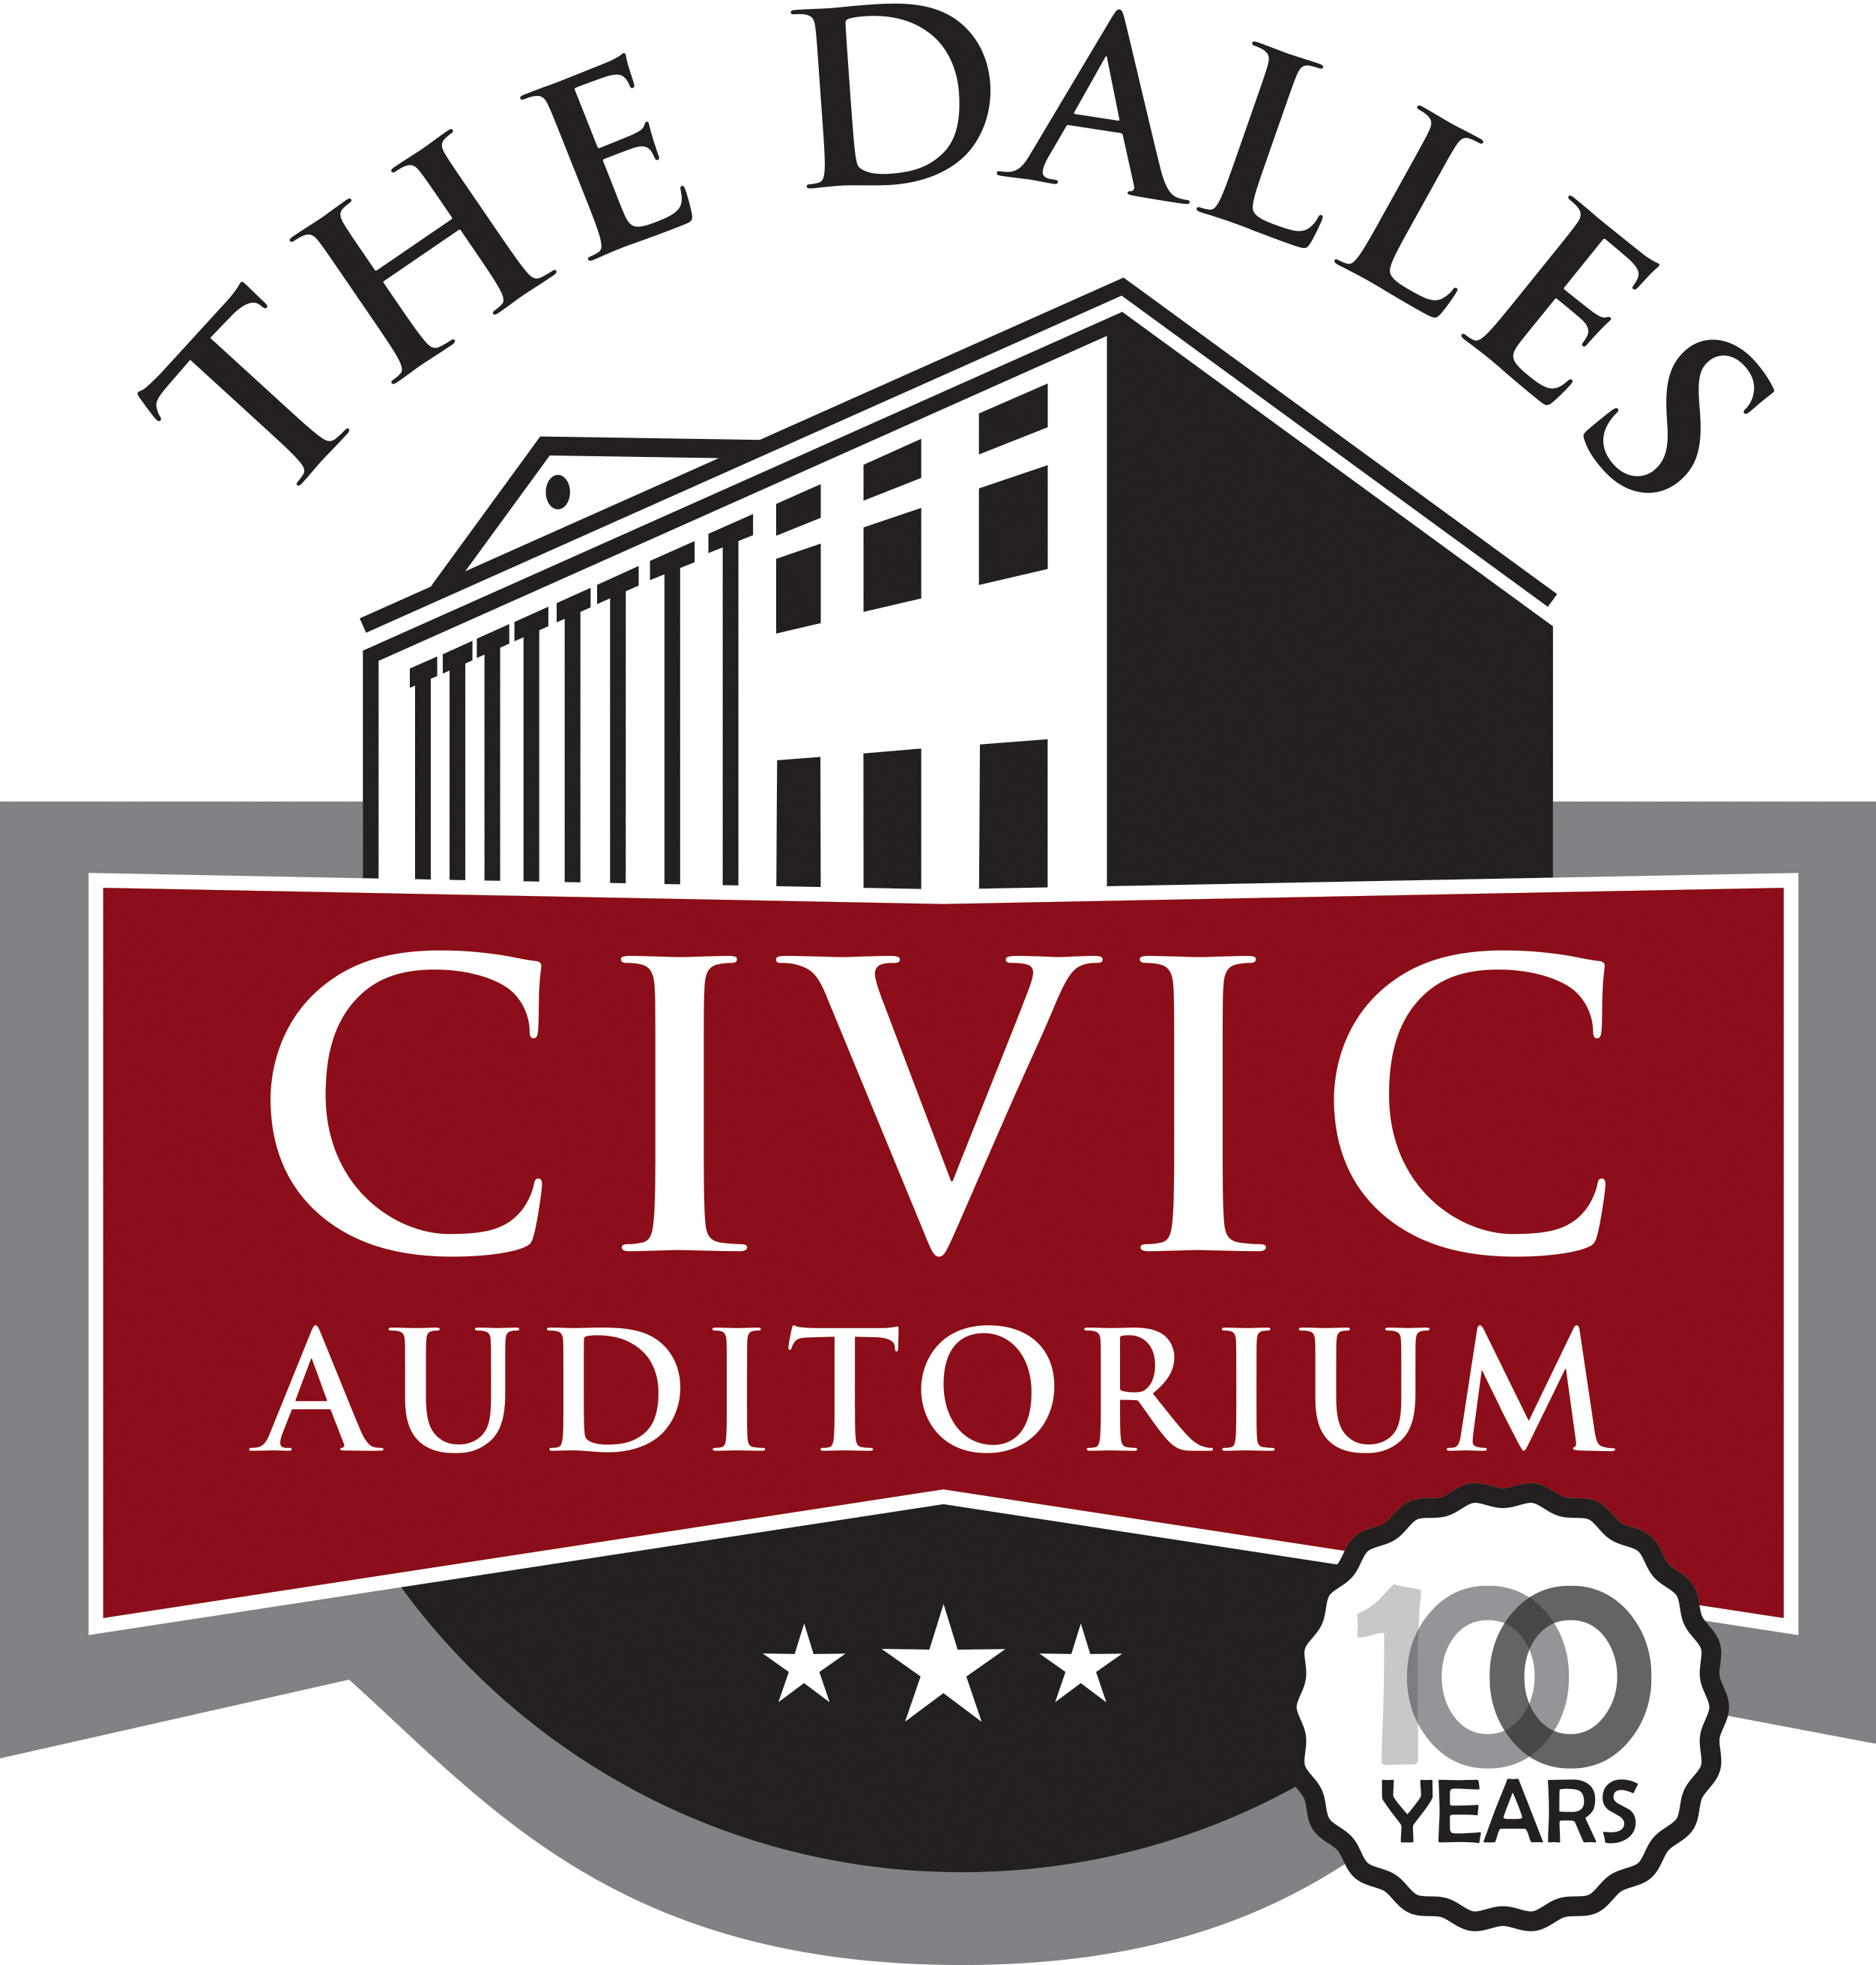 Events at The Dalles Civic Auditorium in THE DALLES, OR by Yaymaker